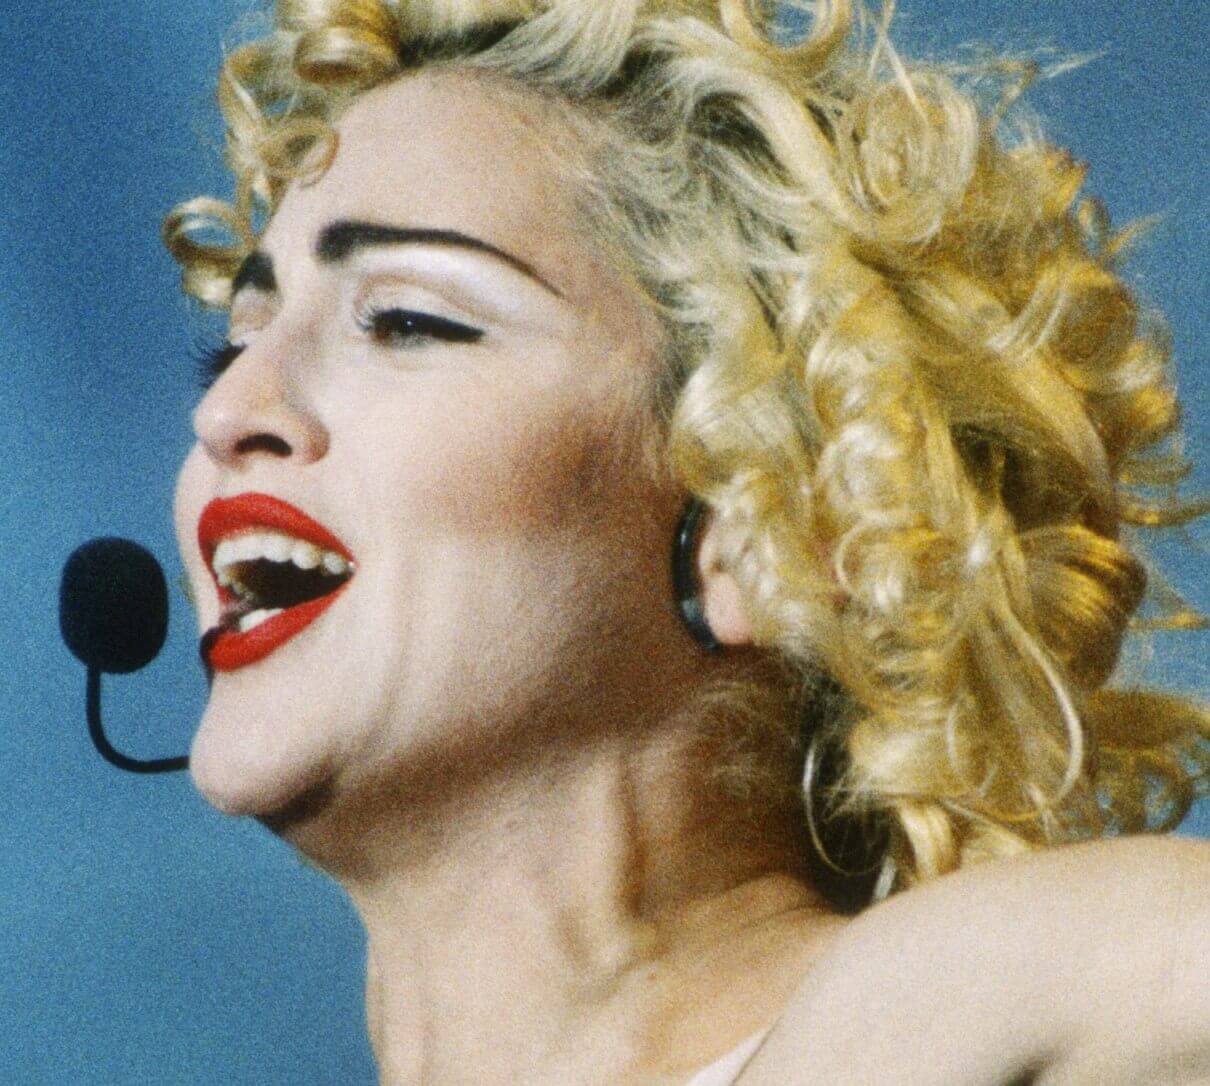 "Lucky Star" singer Madonna with a microphone